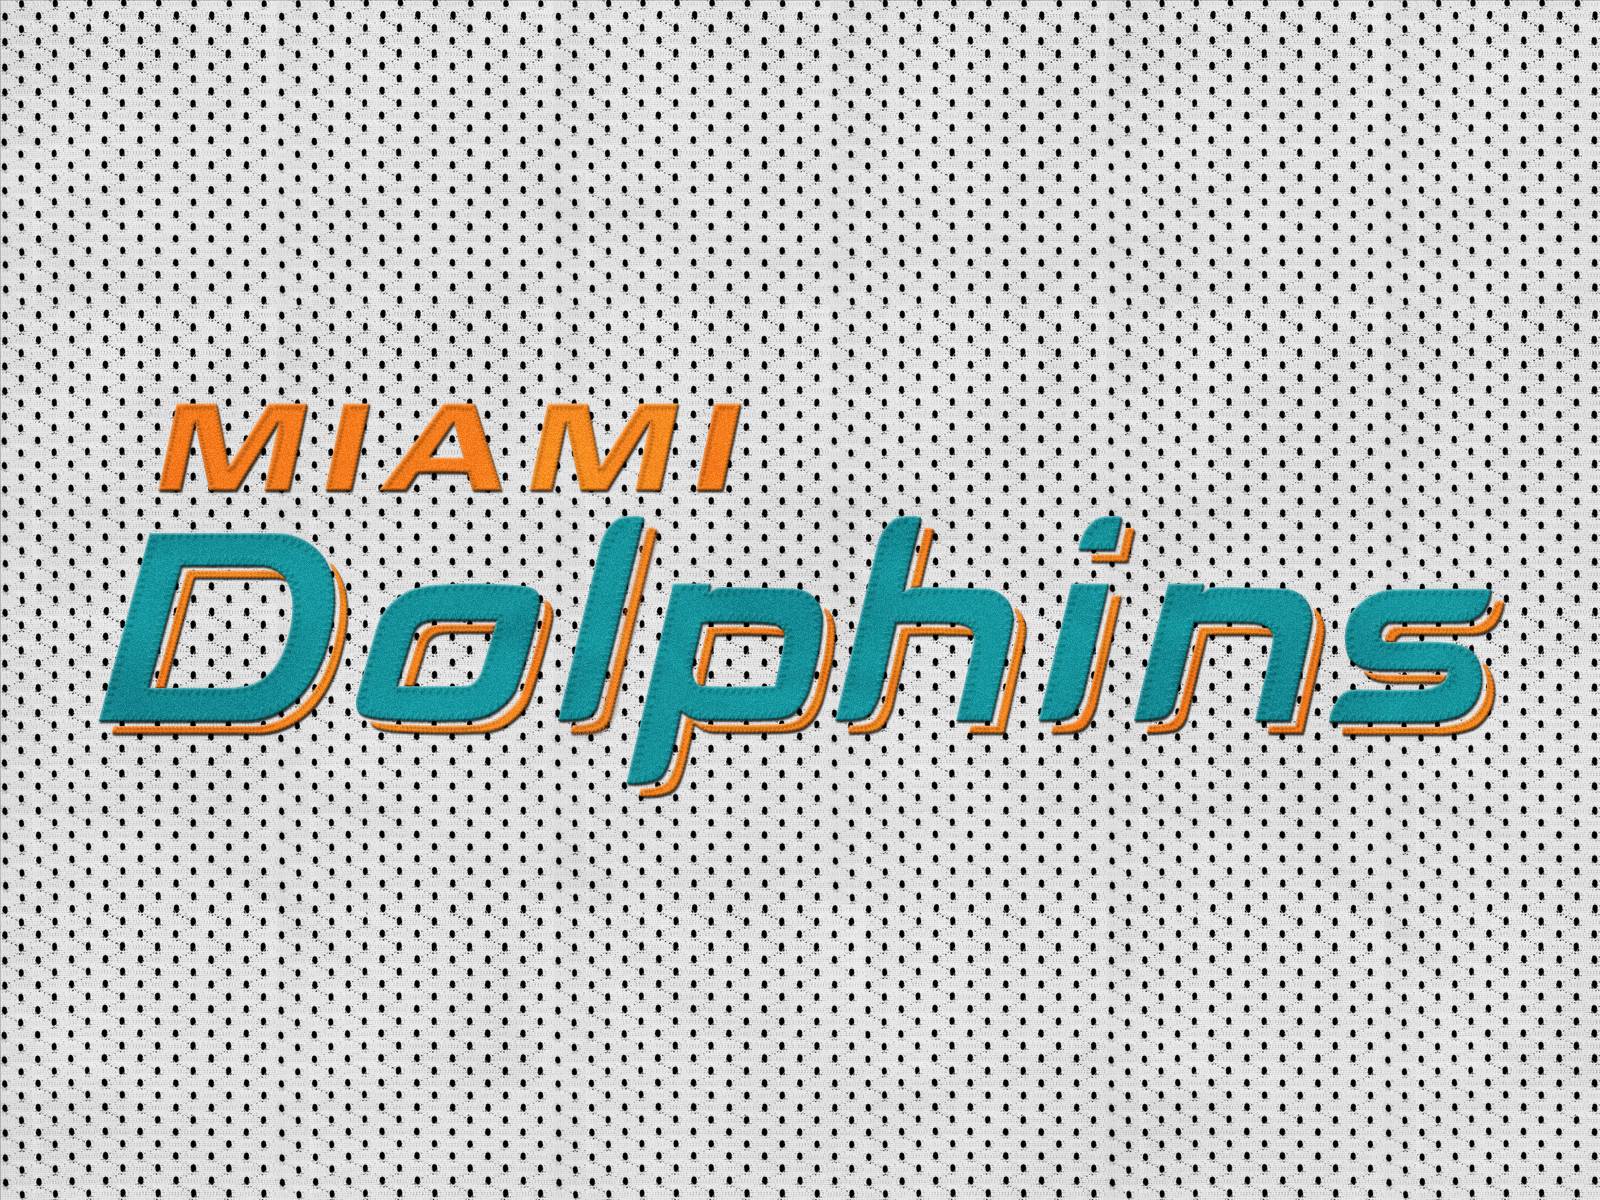 Miami Dolphins Nfl Football Rh Wallpaper Background